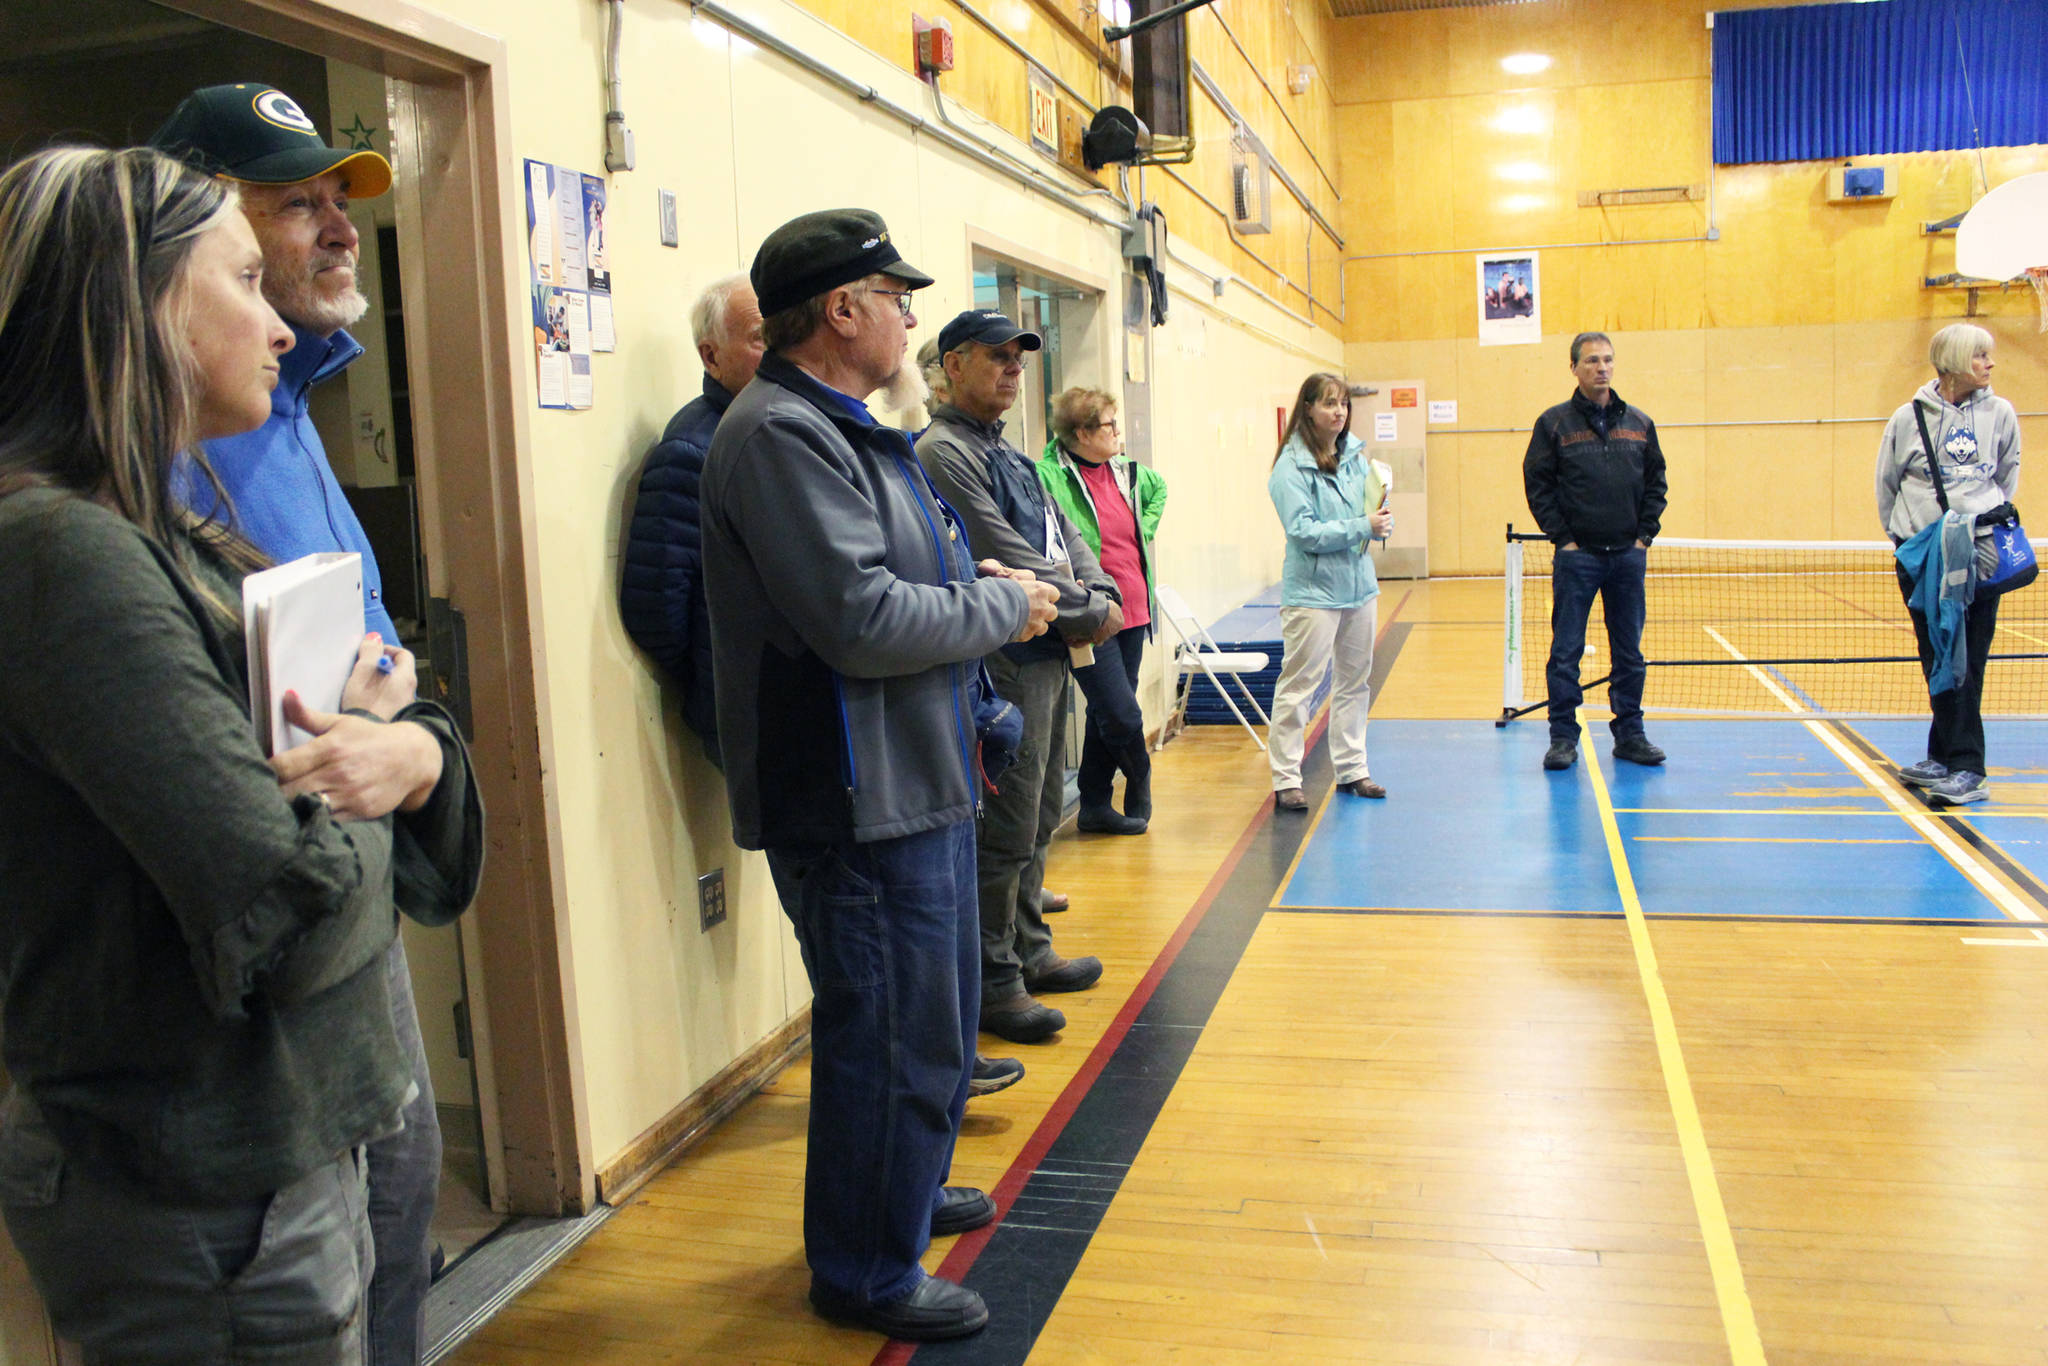 Members of the HERC Task Force and the public, located in the gym currently used for community recreation, listen to city staff talk about the state of the building during a walk-through Tuesday, June 26, 2018 in Homer, Alaska. (Homer News file photo)